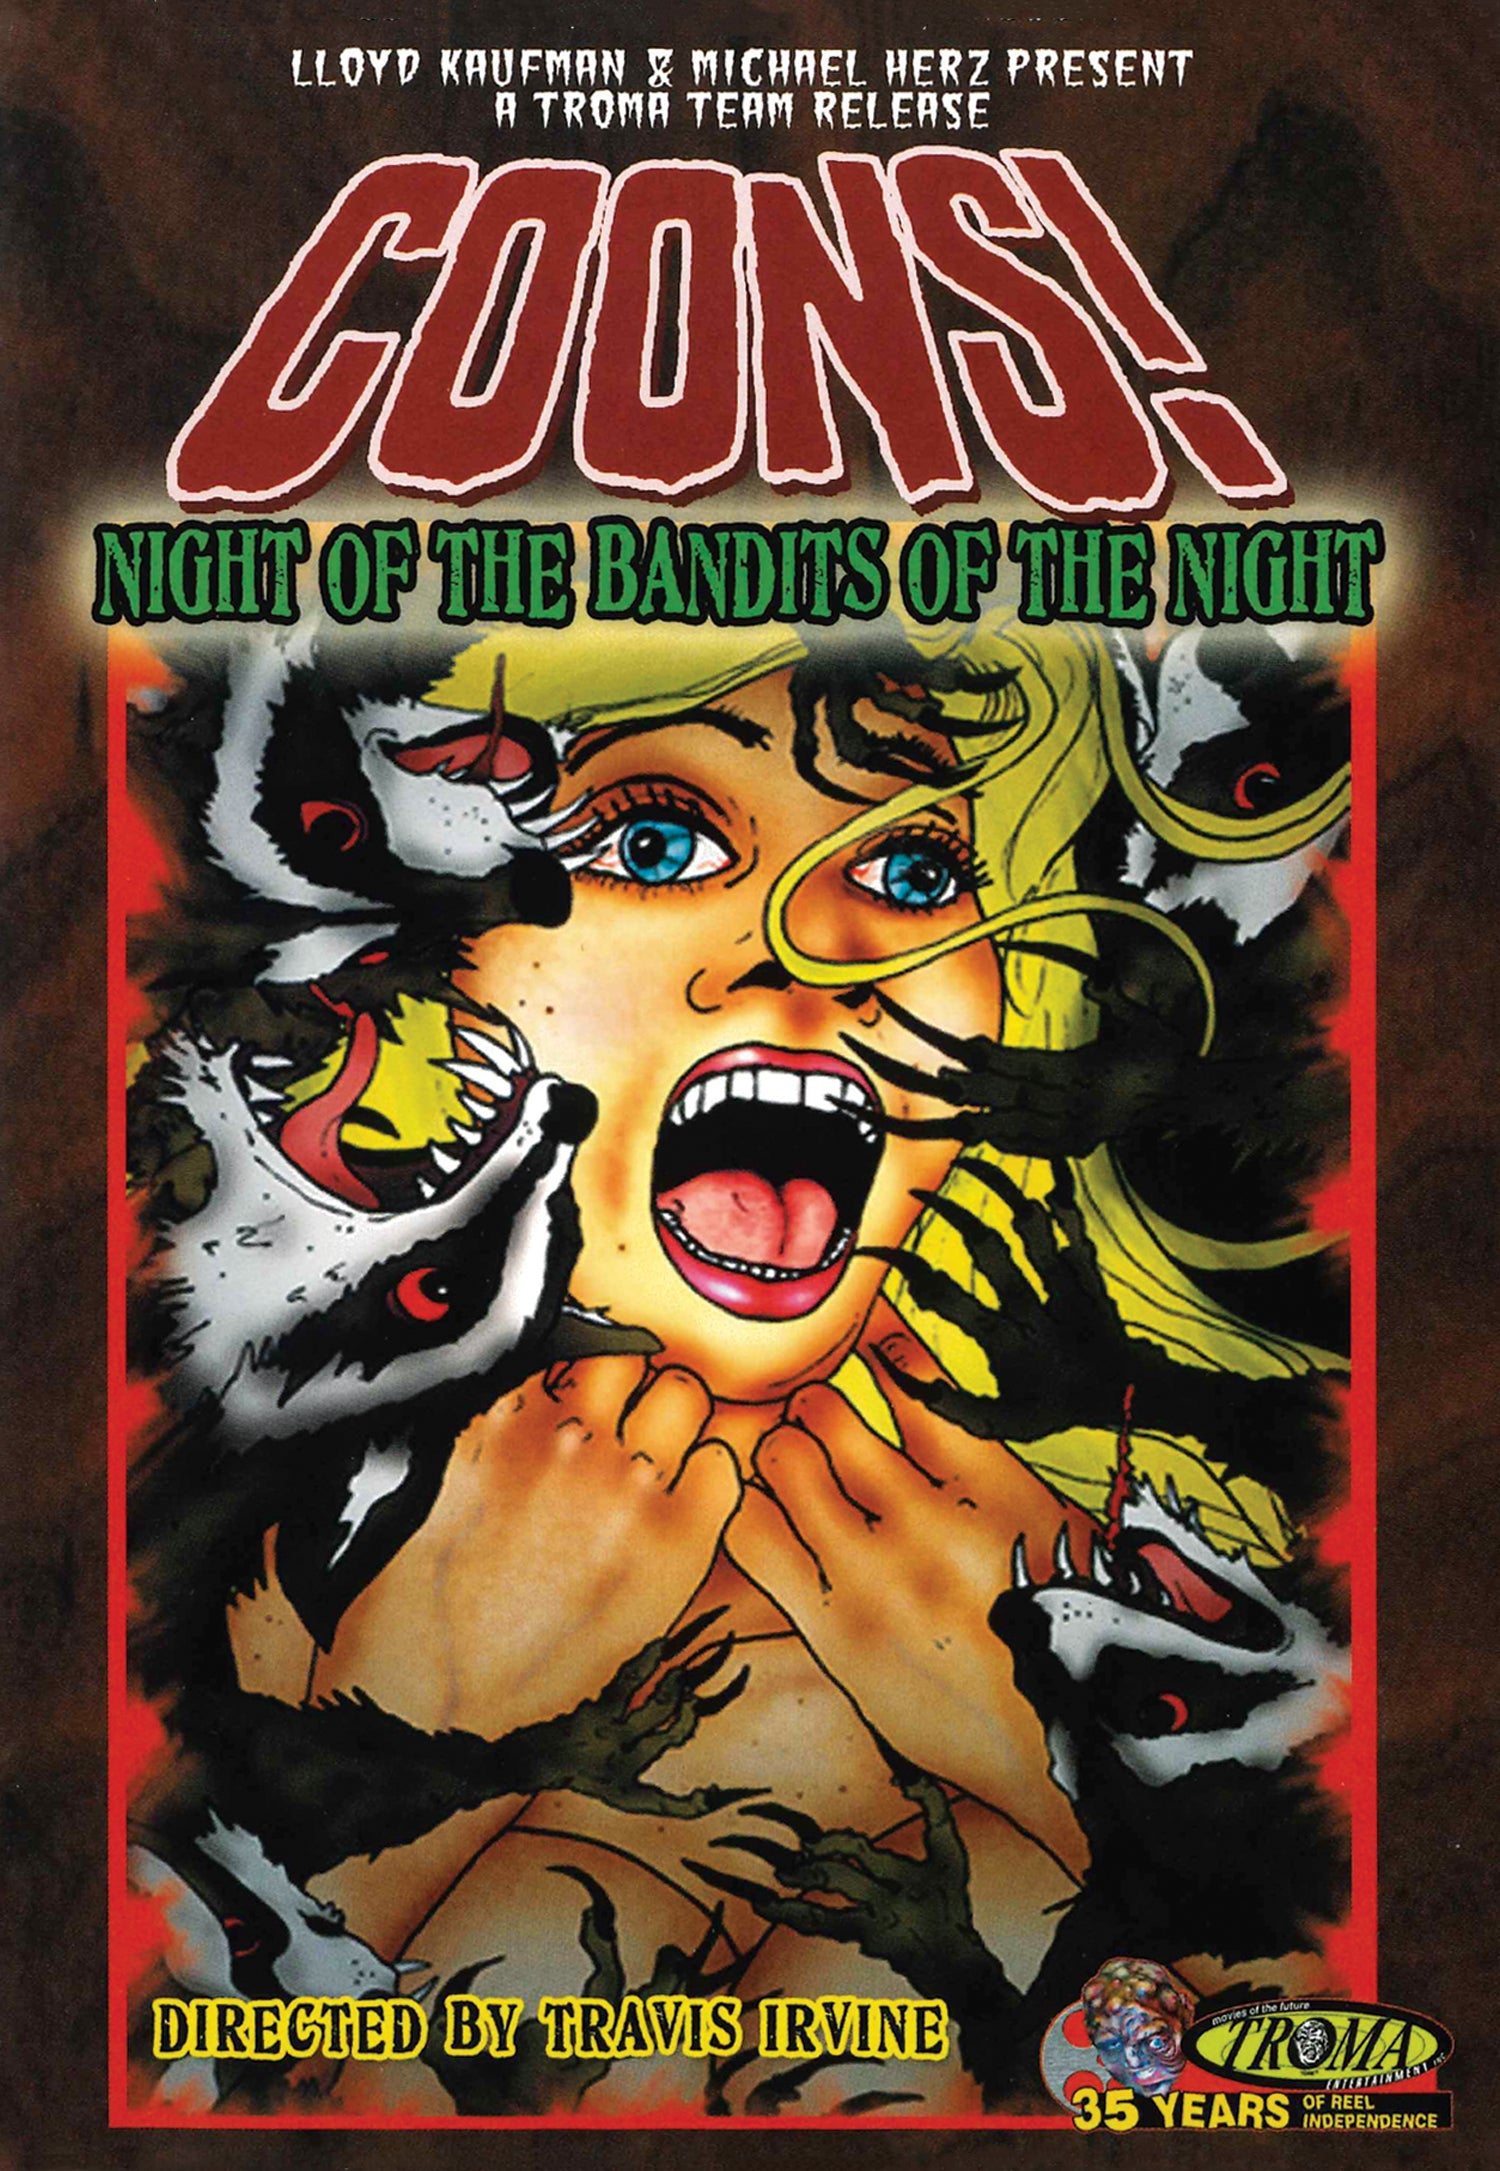 COONS!: NIGHT OF THE BANDITS DVD